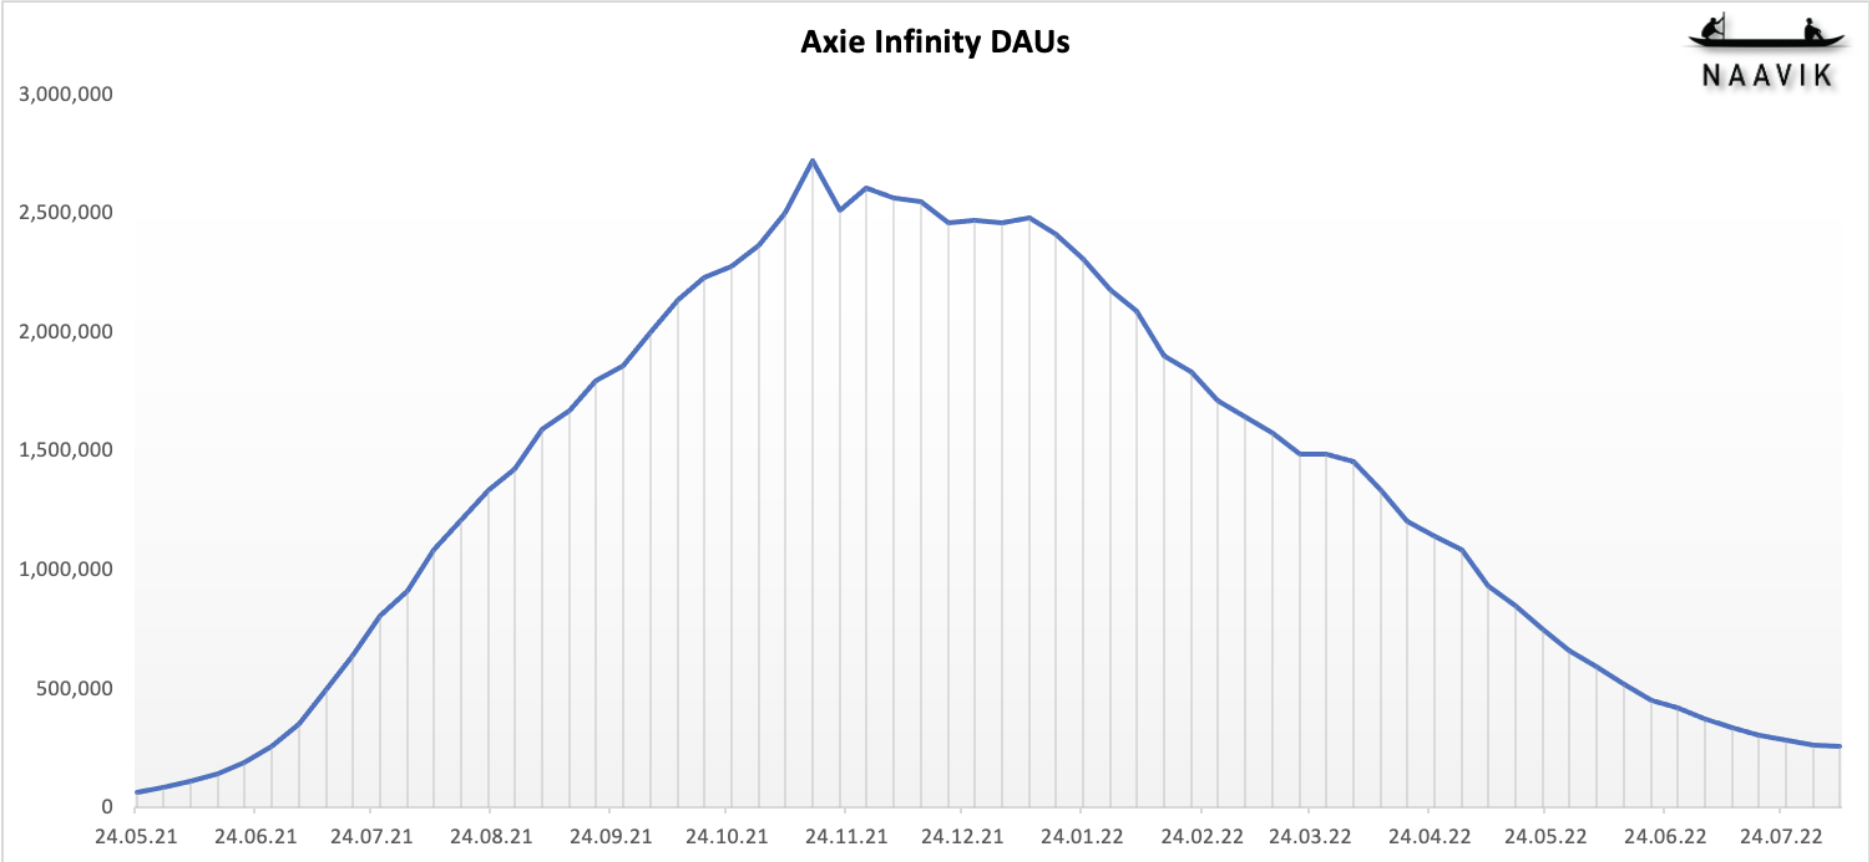 Axie Infinity's daily active users (DAUs) peaked in November 2021, before undergoing a steep fall